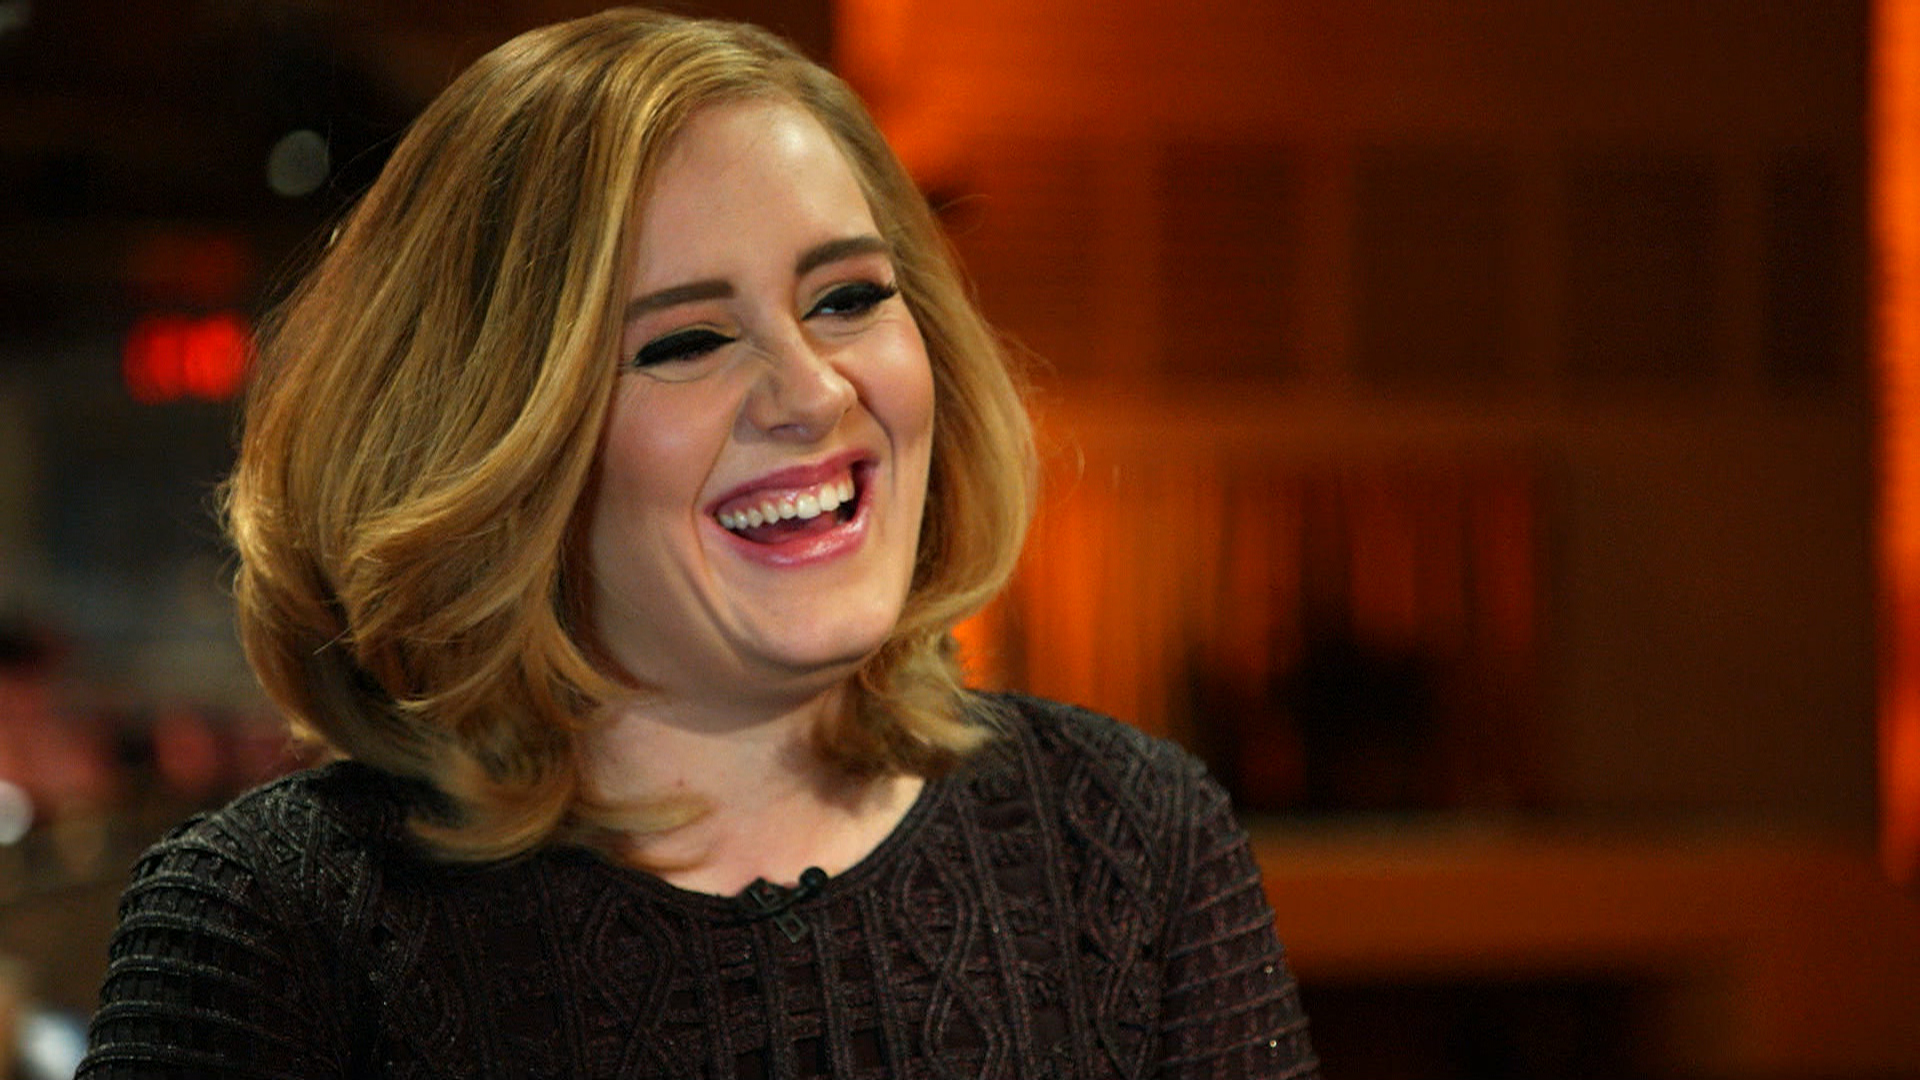 Adele debuts new haircut on the 'X Factor' UK1920 x 1080